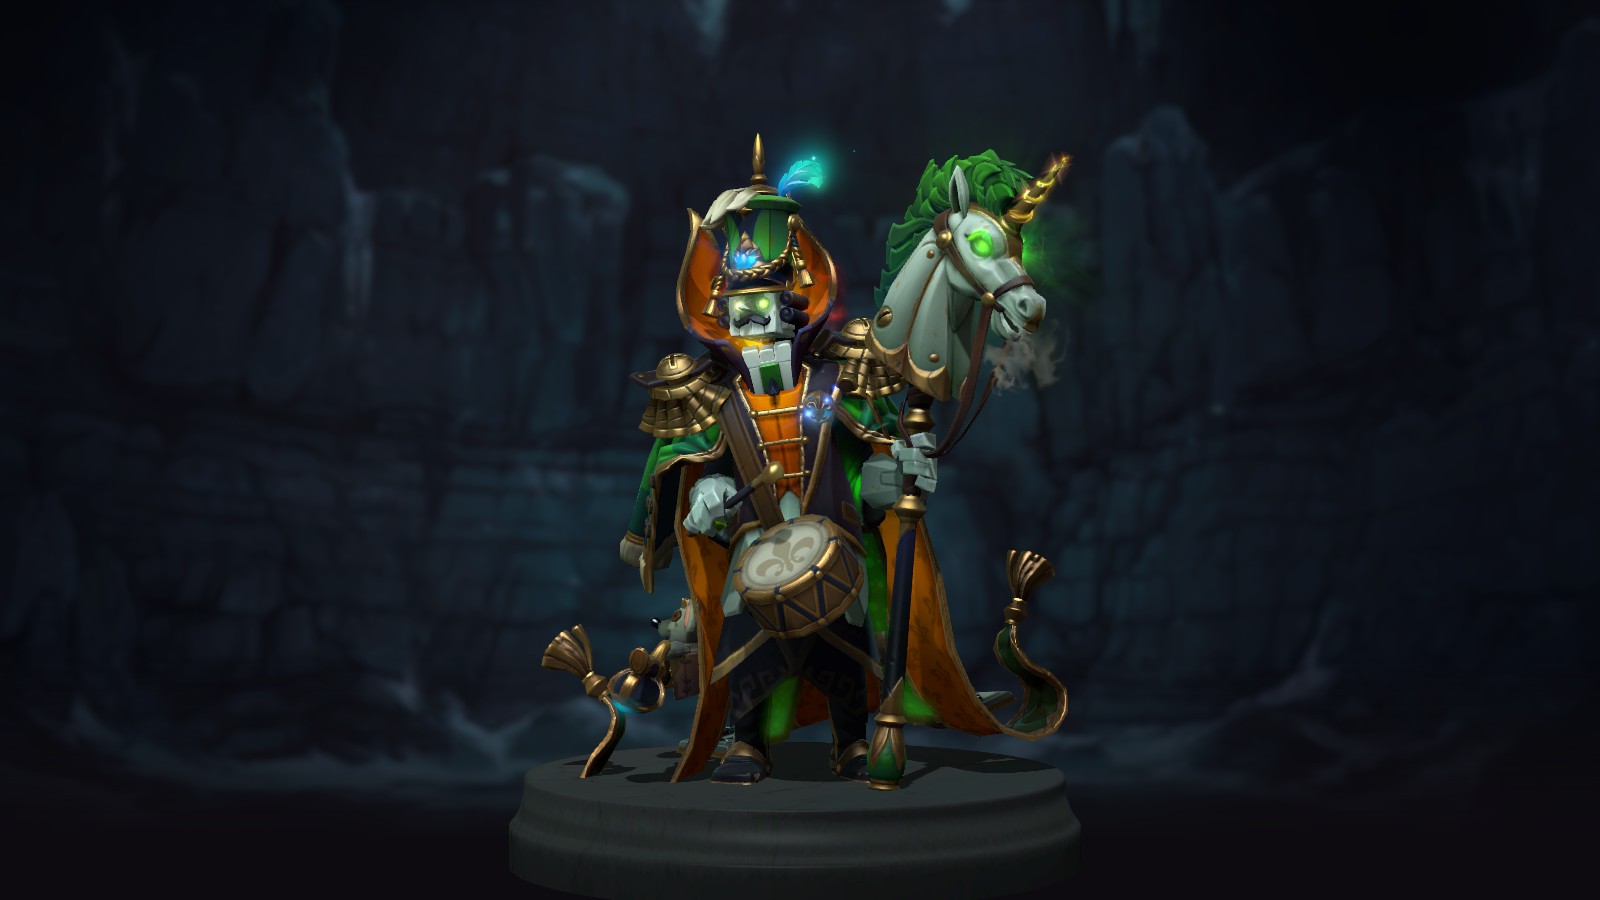 Rubick - March of the Crackerjack Mage